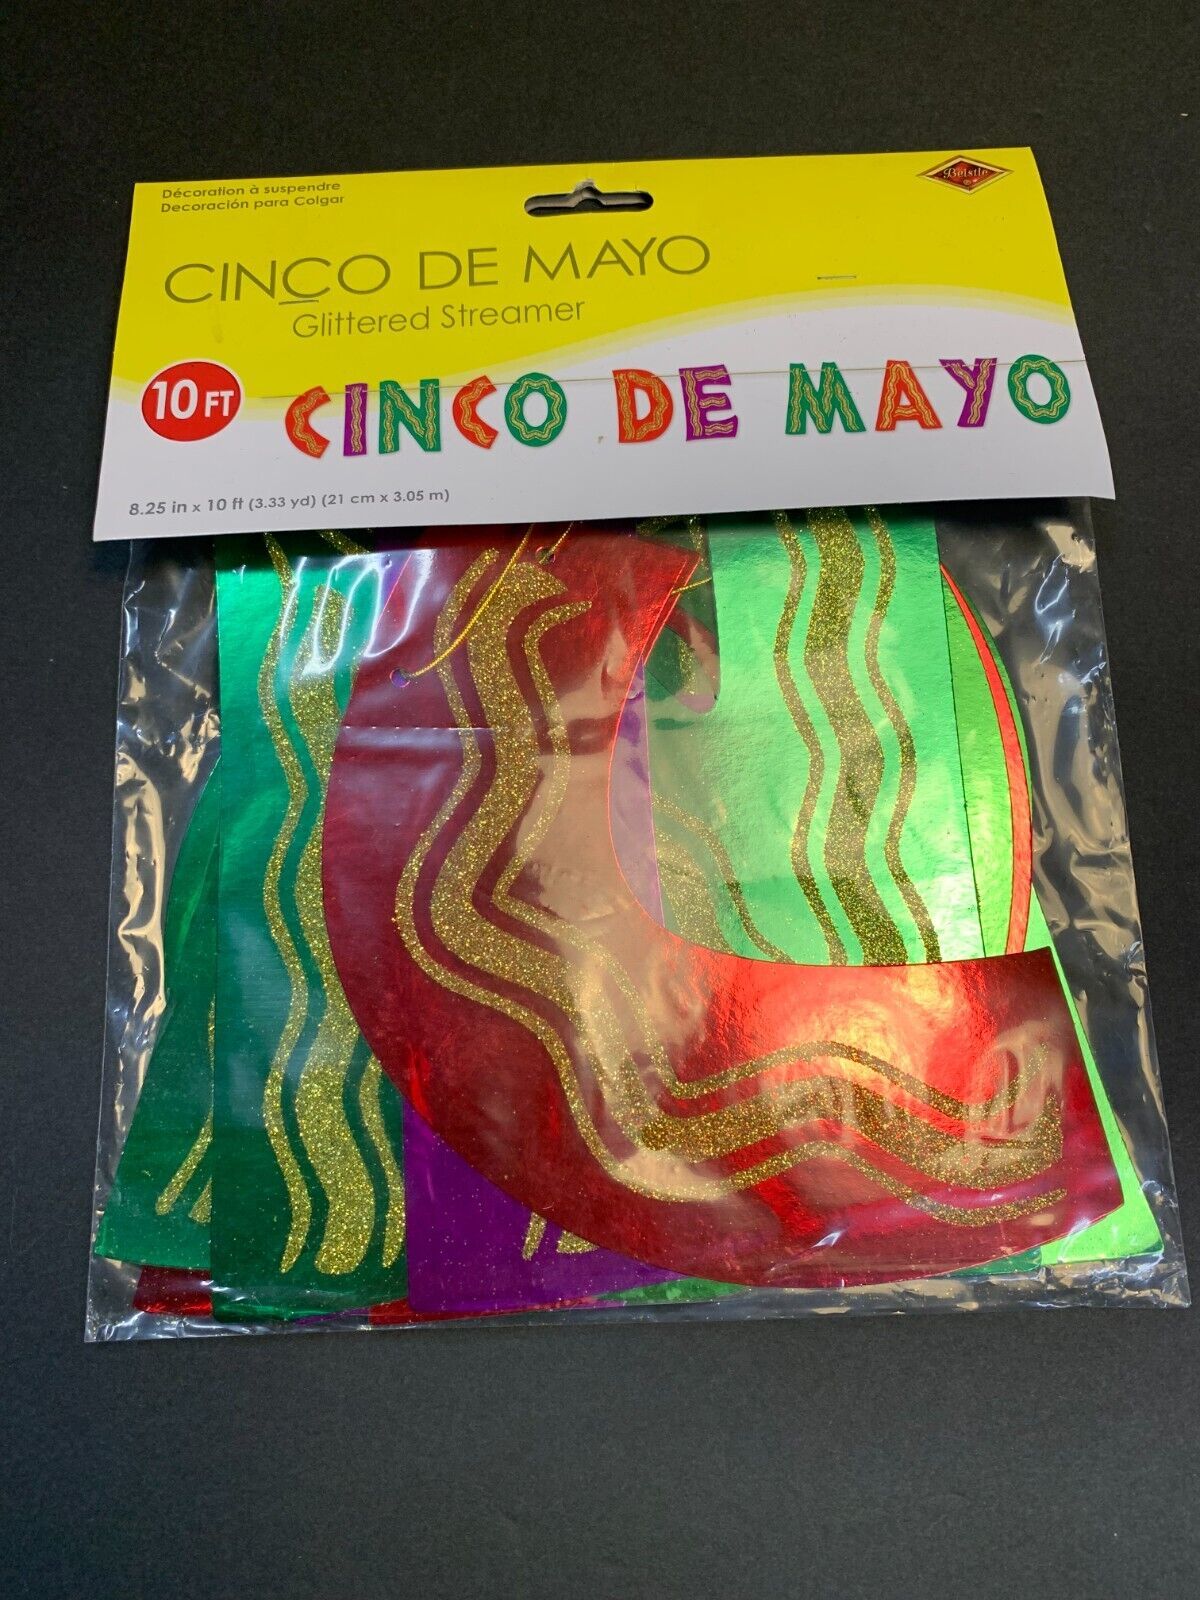 Primary image for Cinco De Mayo Glittered Streamer Party Decoration 10 Foot